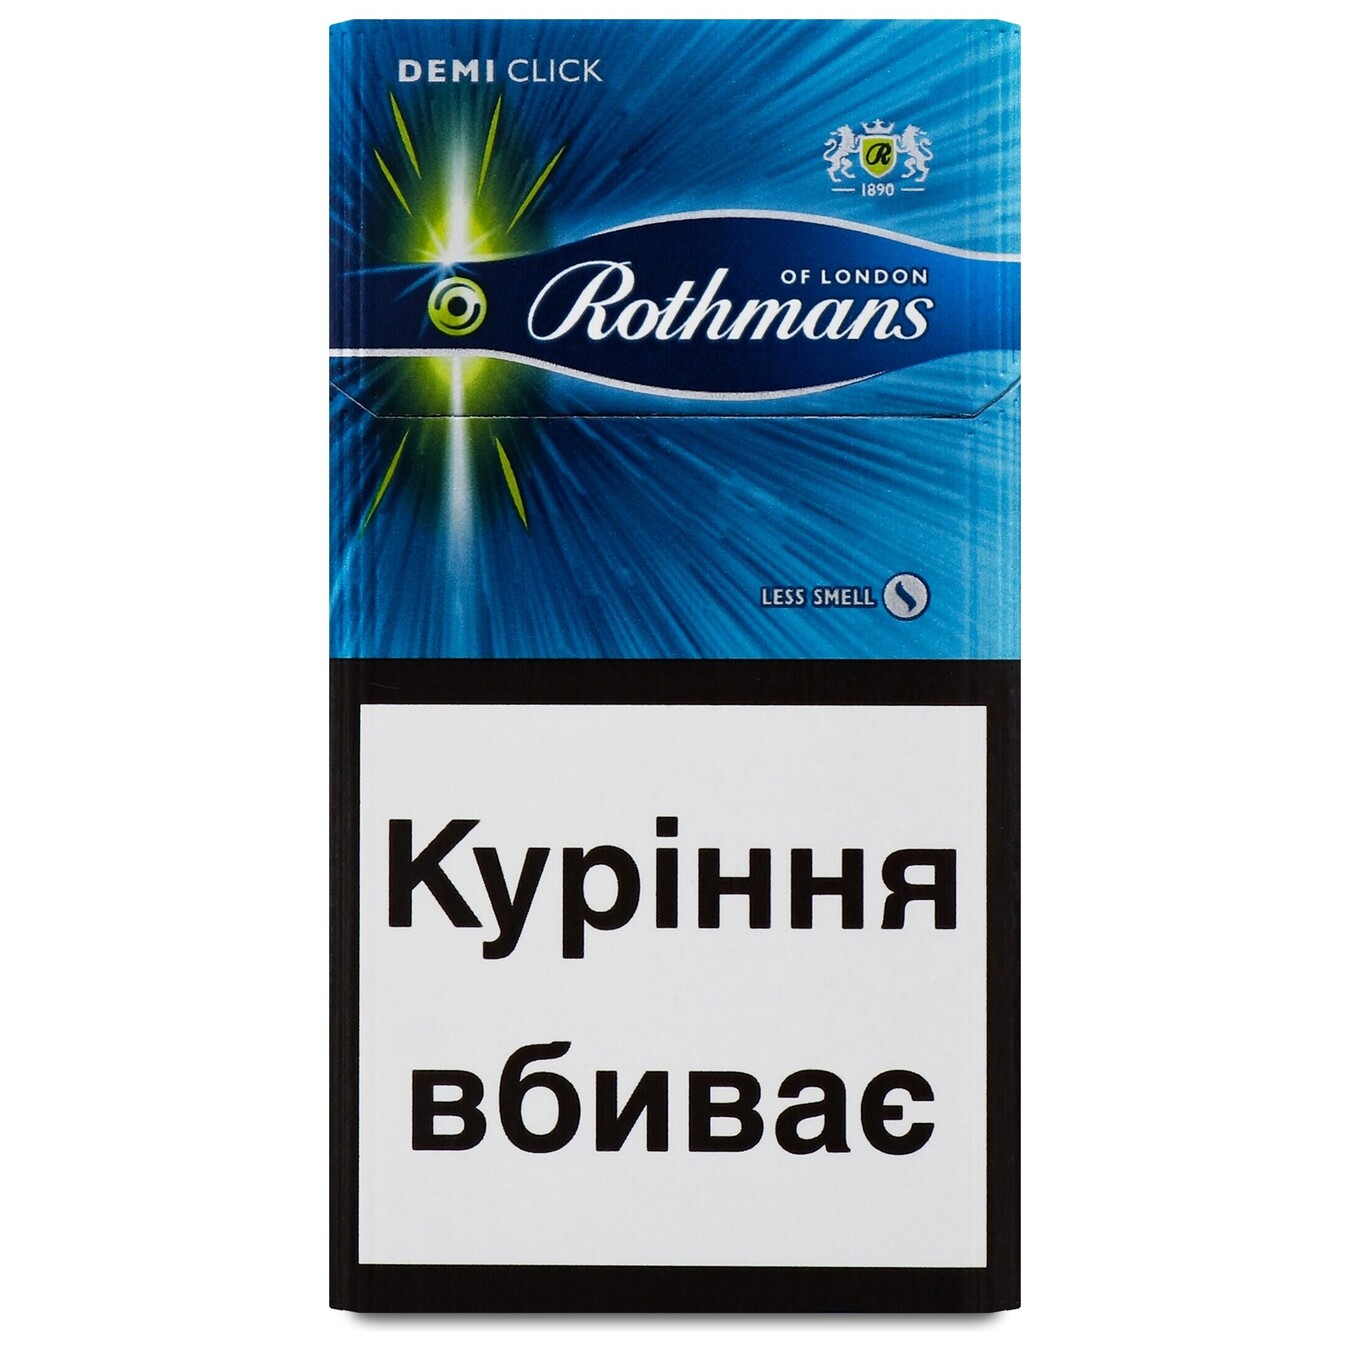 Rothmans Demi Click Cigarettes 20 pcs (the price is indicated without excise tax)